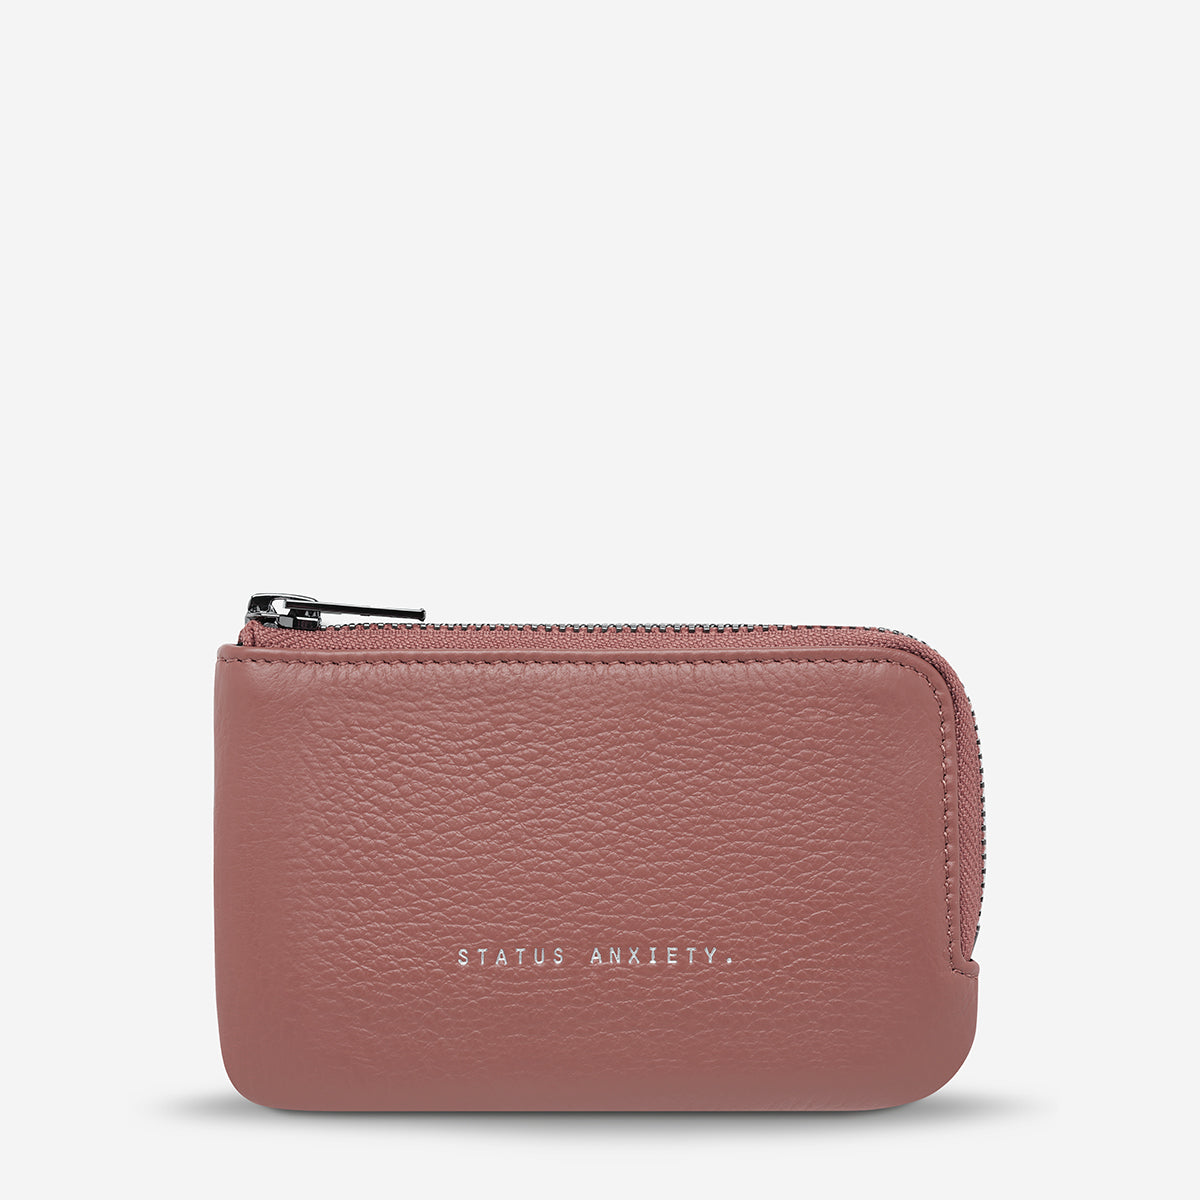 Status Anxiety Left Behind Women's Leather Pouch Dusty Rose